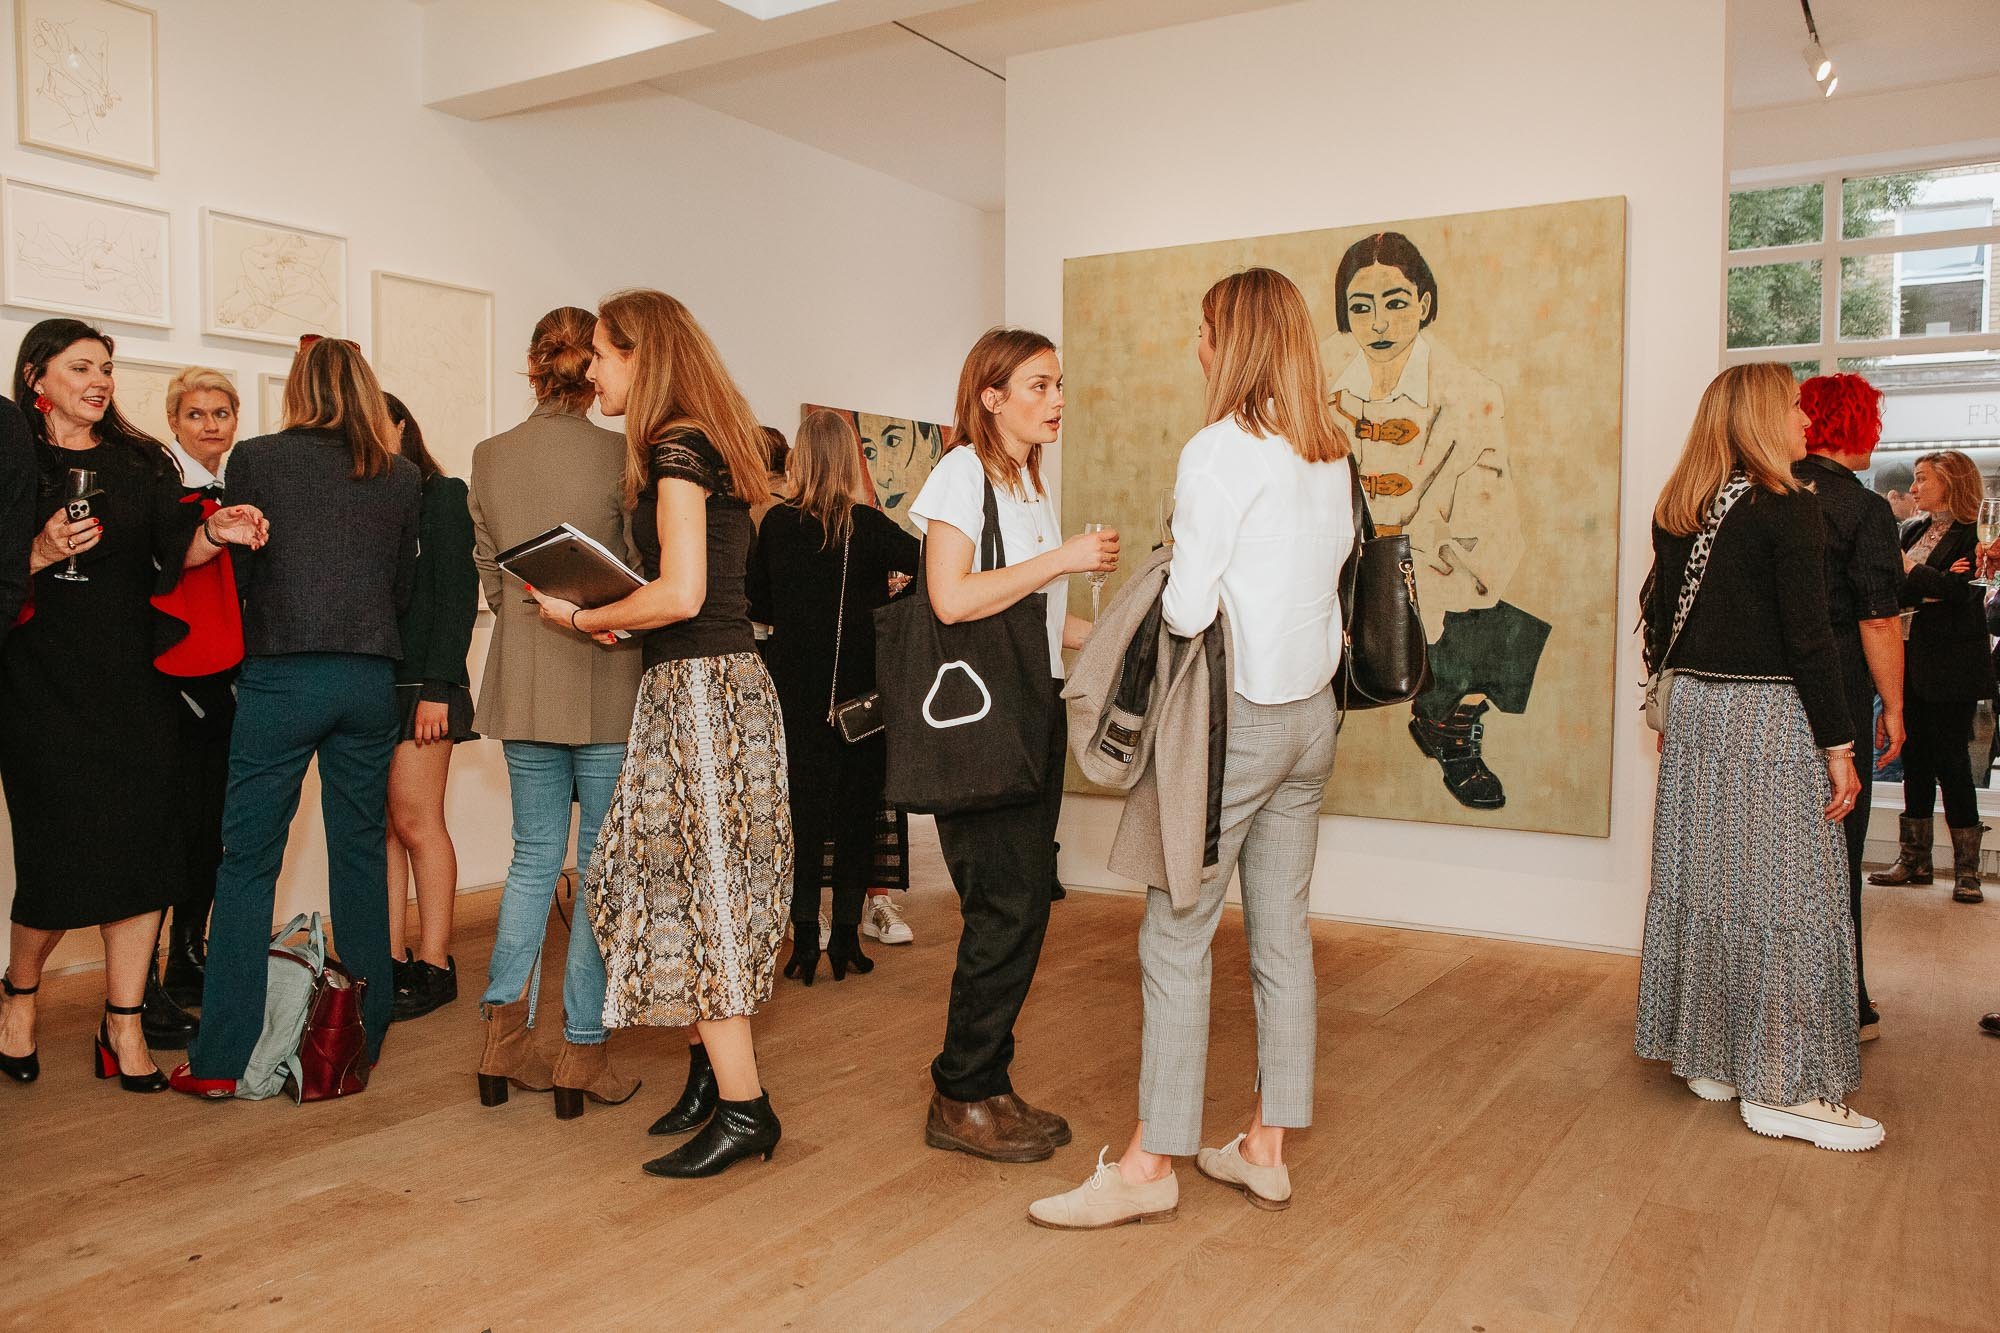 Event photography at Kristin Hjellegjerde gallery in wandsworth.